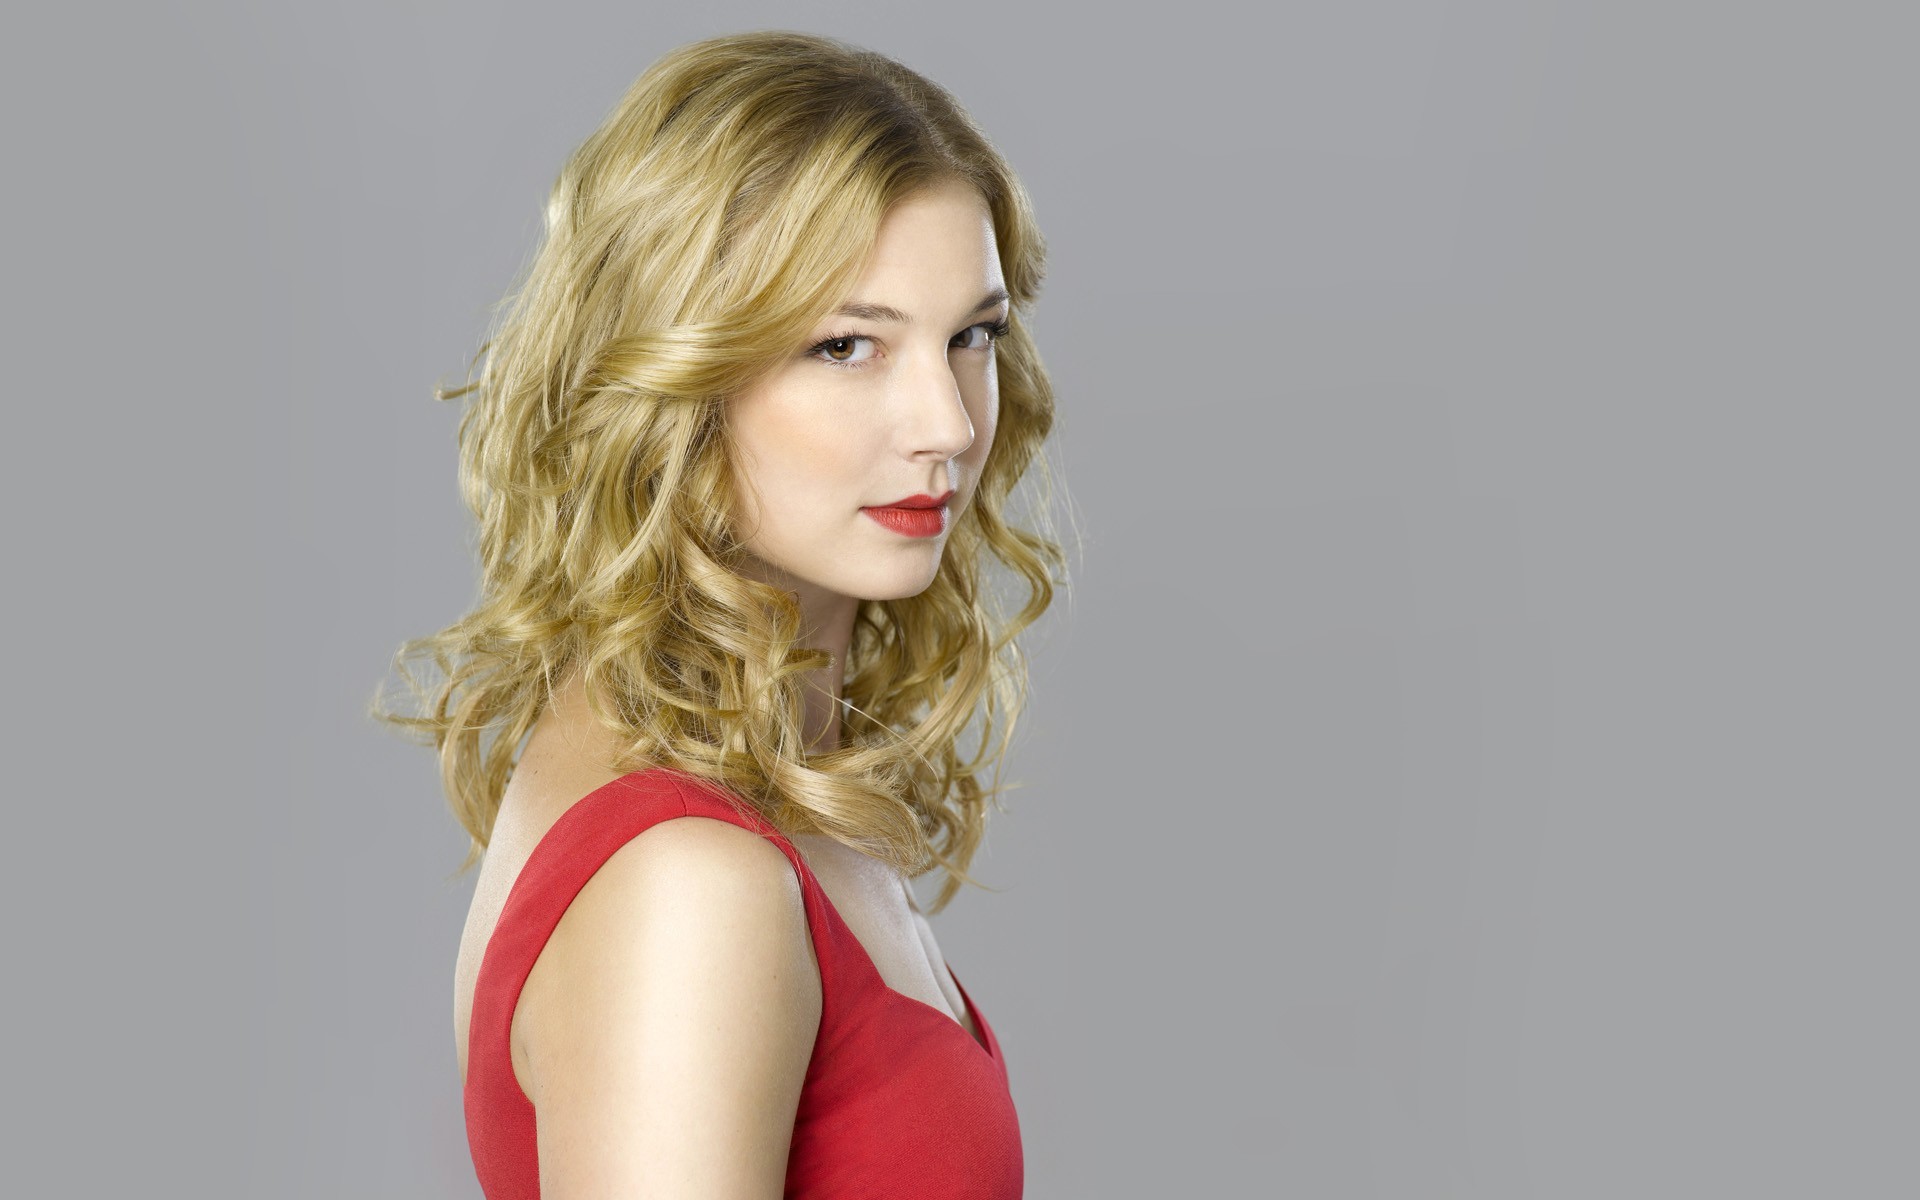 Emily Vancamp, Blonde, Actress, Celebrity, Red, Dress, Simple Background Wallpaper